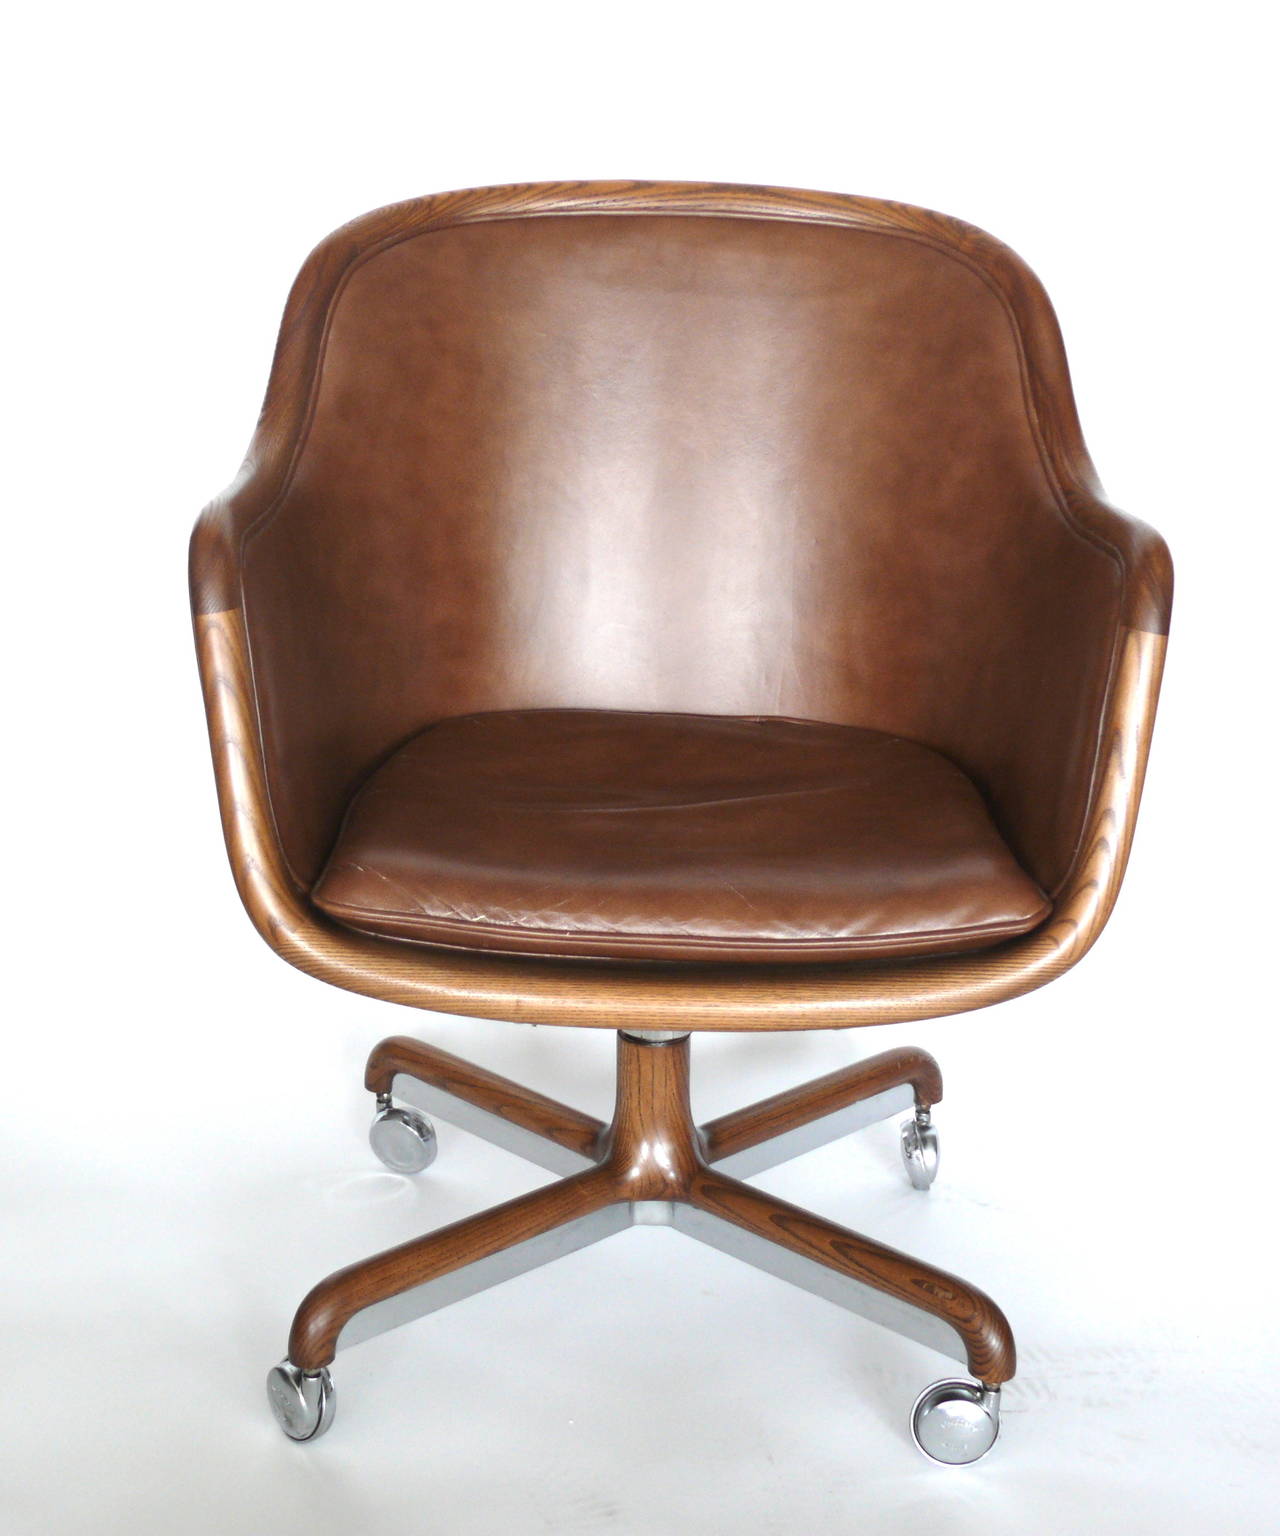 Handsome oak and leather office chair by Ward Bennett. Bucket seat with bottom cushion. Chrome base with oak trim adds a unique detail. Original leather has beautiful patina. Chair is in excellent vintage condition with original casters. Priced